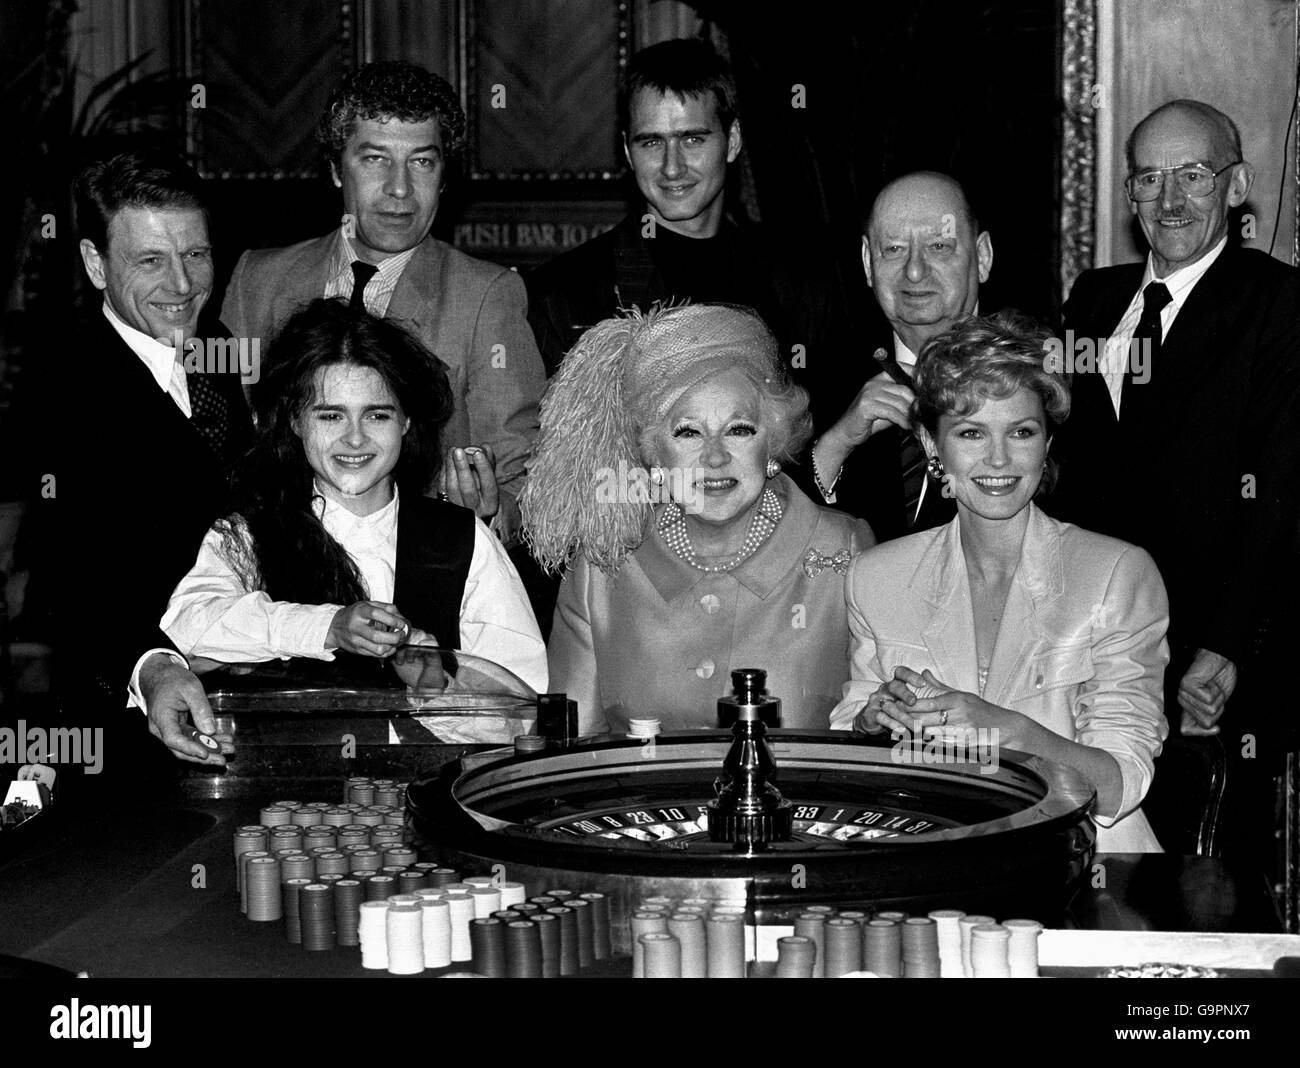 The stars of a new video taken from a Barbara Carland book, Hazard of Hearts, gather round a poker table. (back l-r) Edward Fox, Gareth Hunt, Marcus Gilbert, Lord Grade (Producer) and Albert Fennell (Producer). (bottom l-r) Helena Bonham-Carter, Barbara Cartland and Fiona Fullerton. Stock Photo